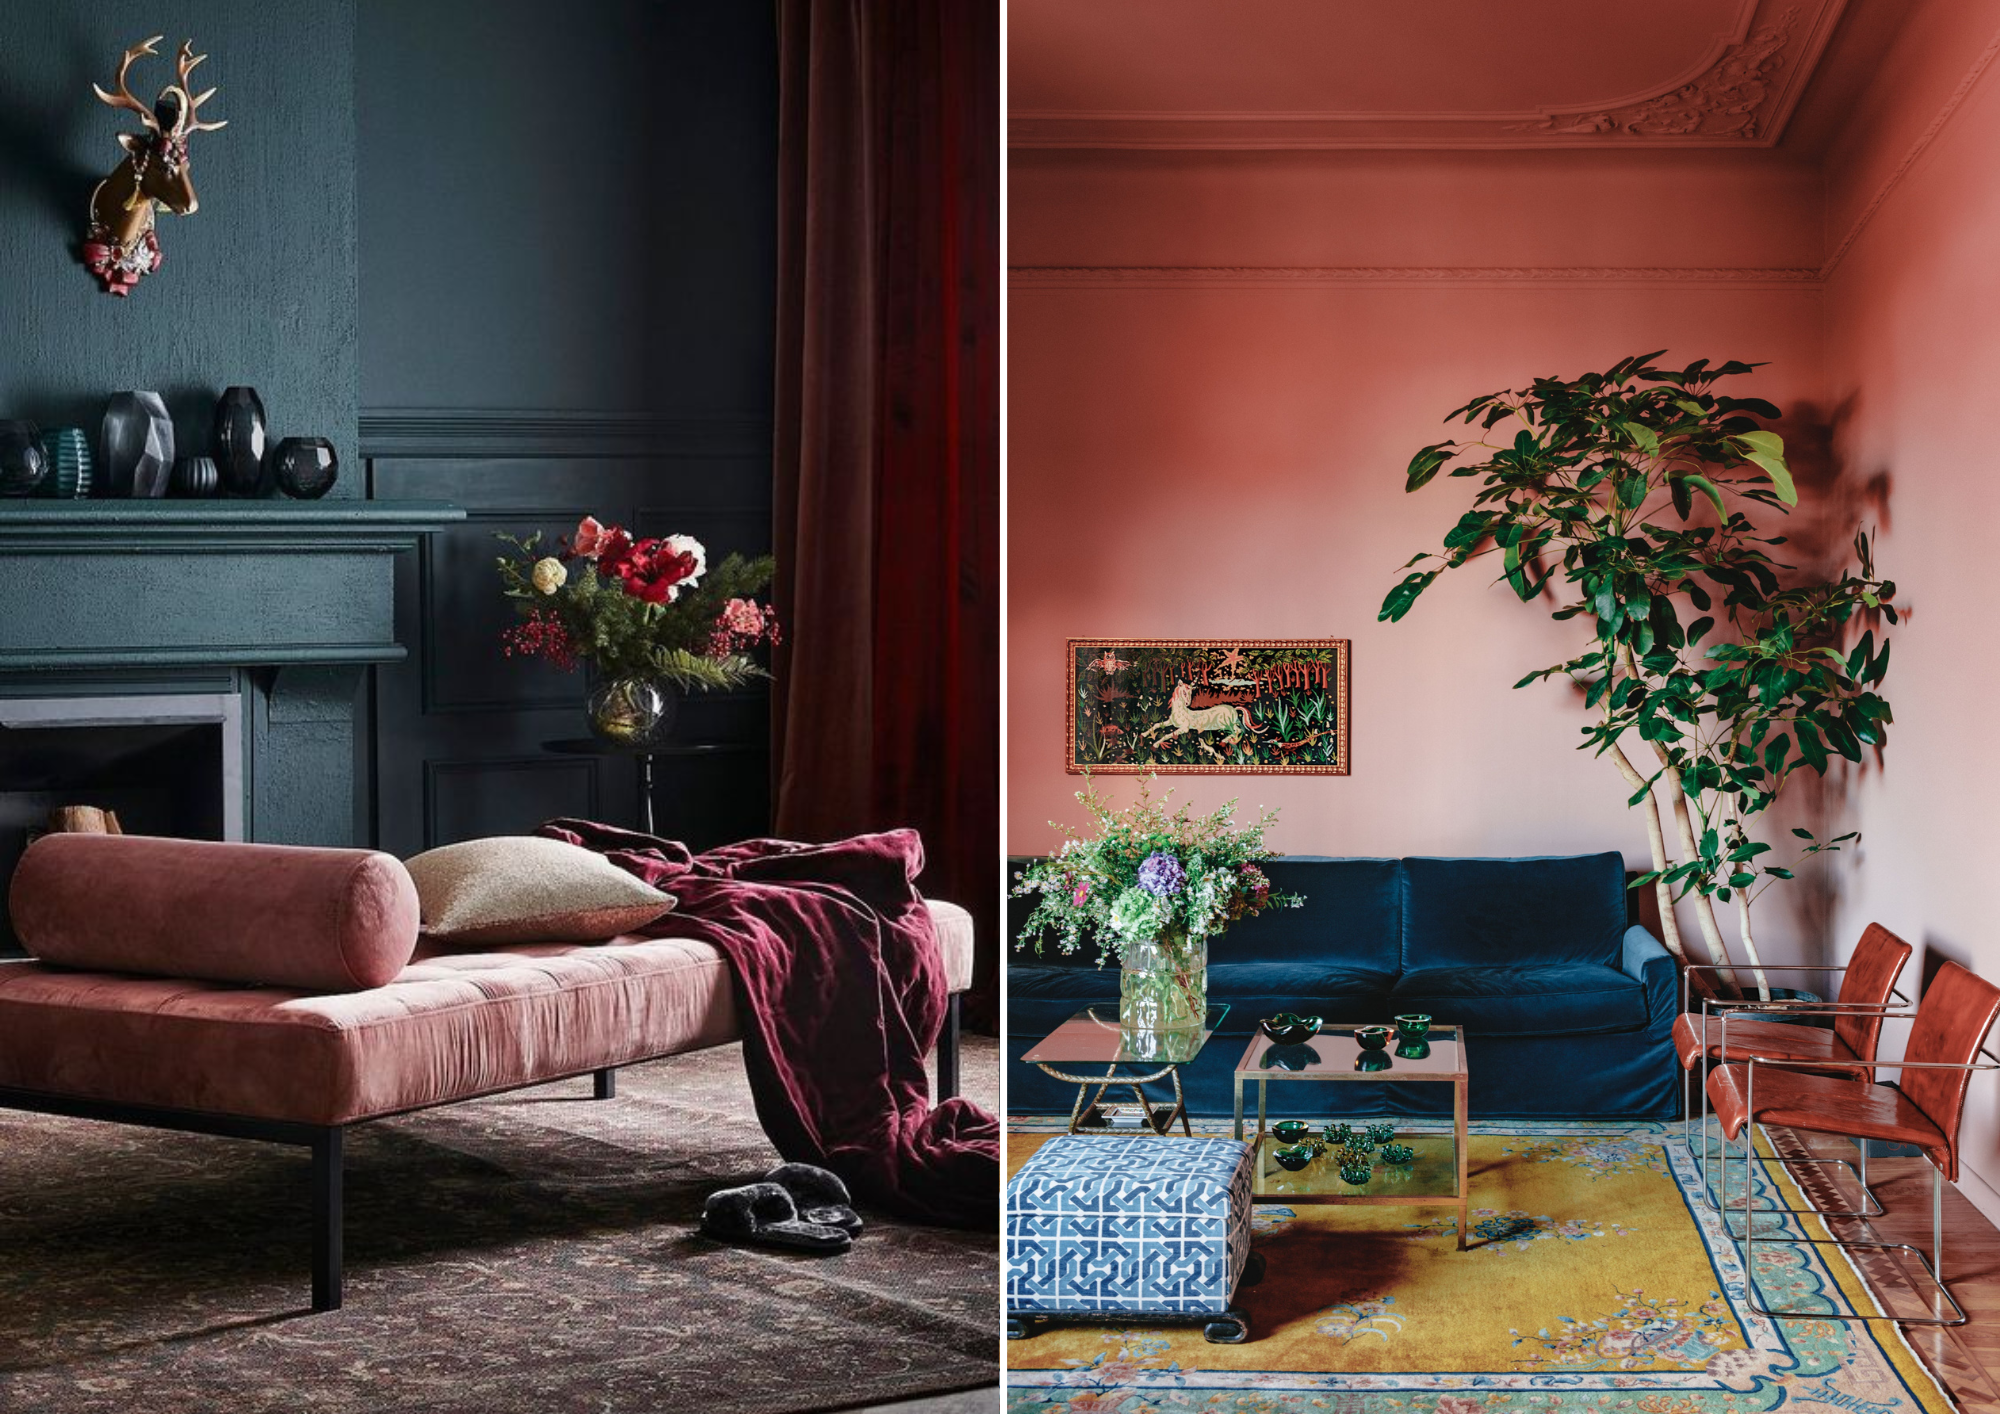 Viva Magenta living room decoration, J.J. Martin's apartment in Milan by Matthieu Salvaing for AD Magazine